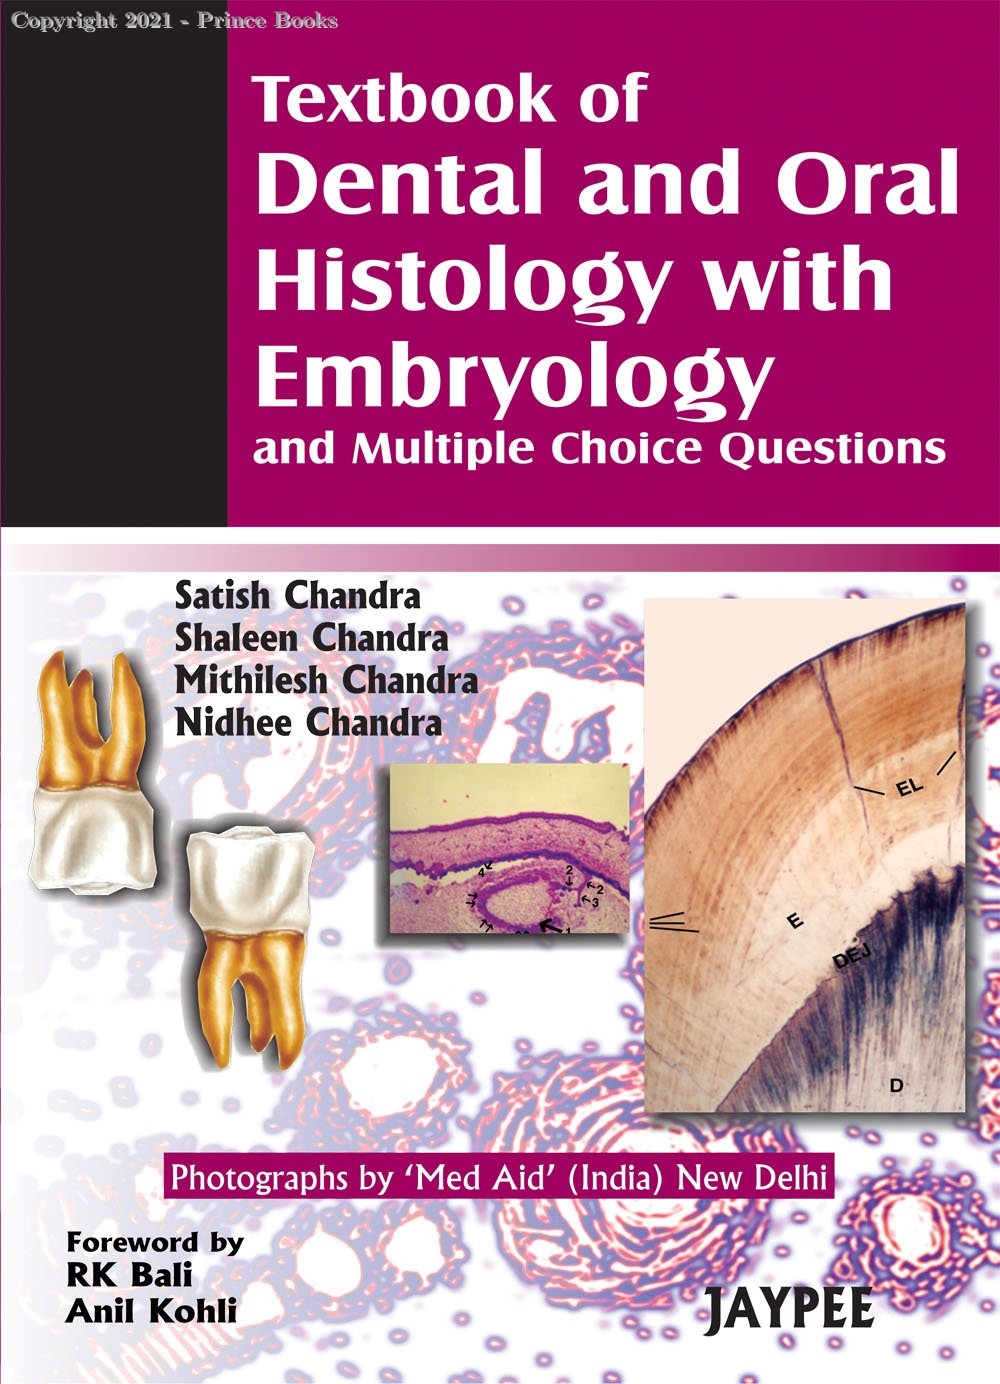 TEXTBOOK OF DENTAL AND ORAL HISTOLOGY WITH EMBRYOLOGY AND multiple choice question